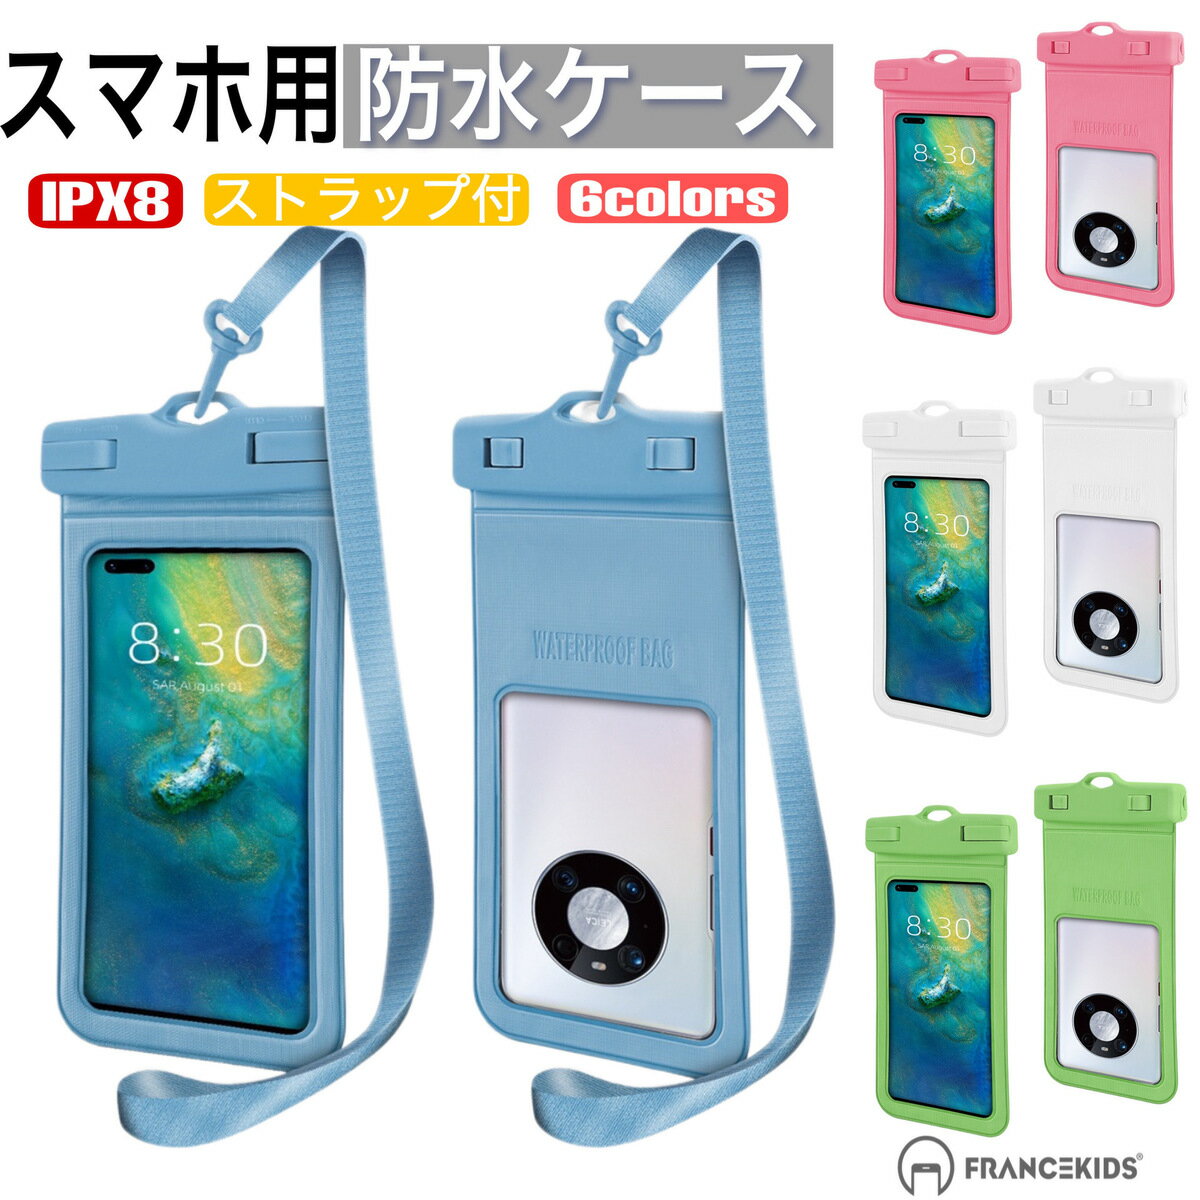 iPhone 防水ケース 全機種対応 スマホ防水ケース IPX8認証 携帯防水ケース 完全防水 水中撮影 温泉 プール 顔認証 スマホ 防水カバー iPhone 14 13 Pro Max 12 11 XR SE2 6.5インチ以下対応 防水ポーチ 海 お風呂 海水浴 水泳 SGS認証 android